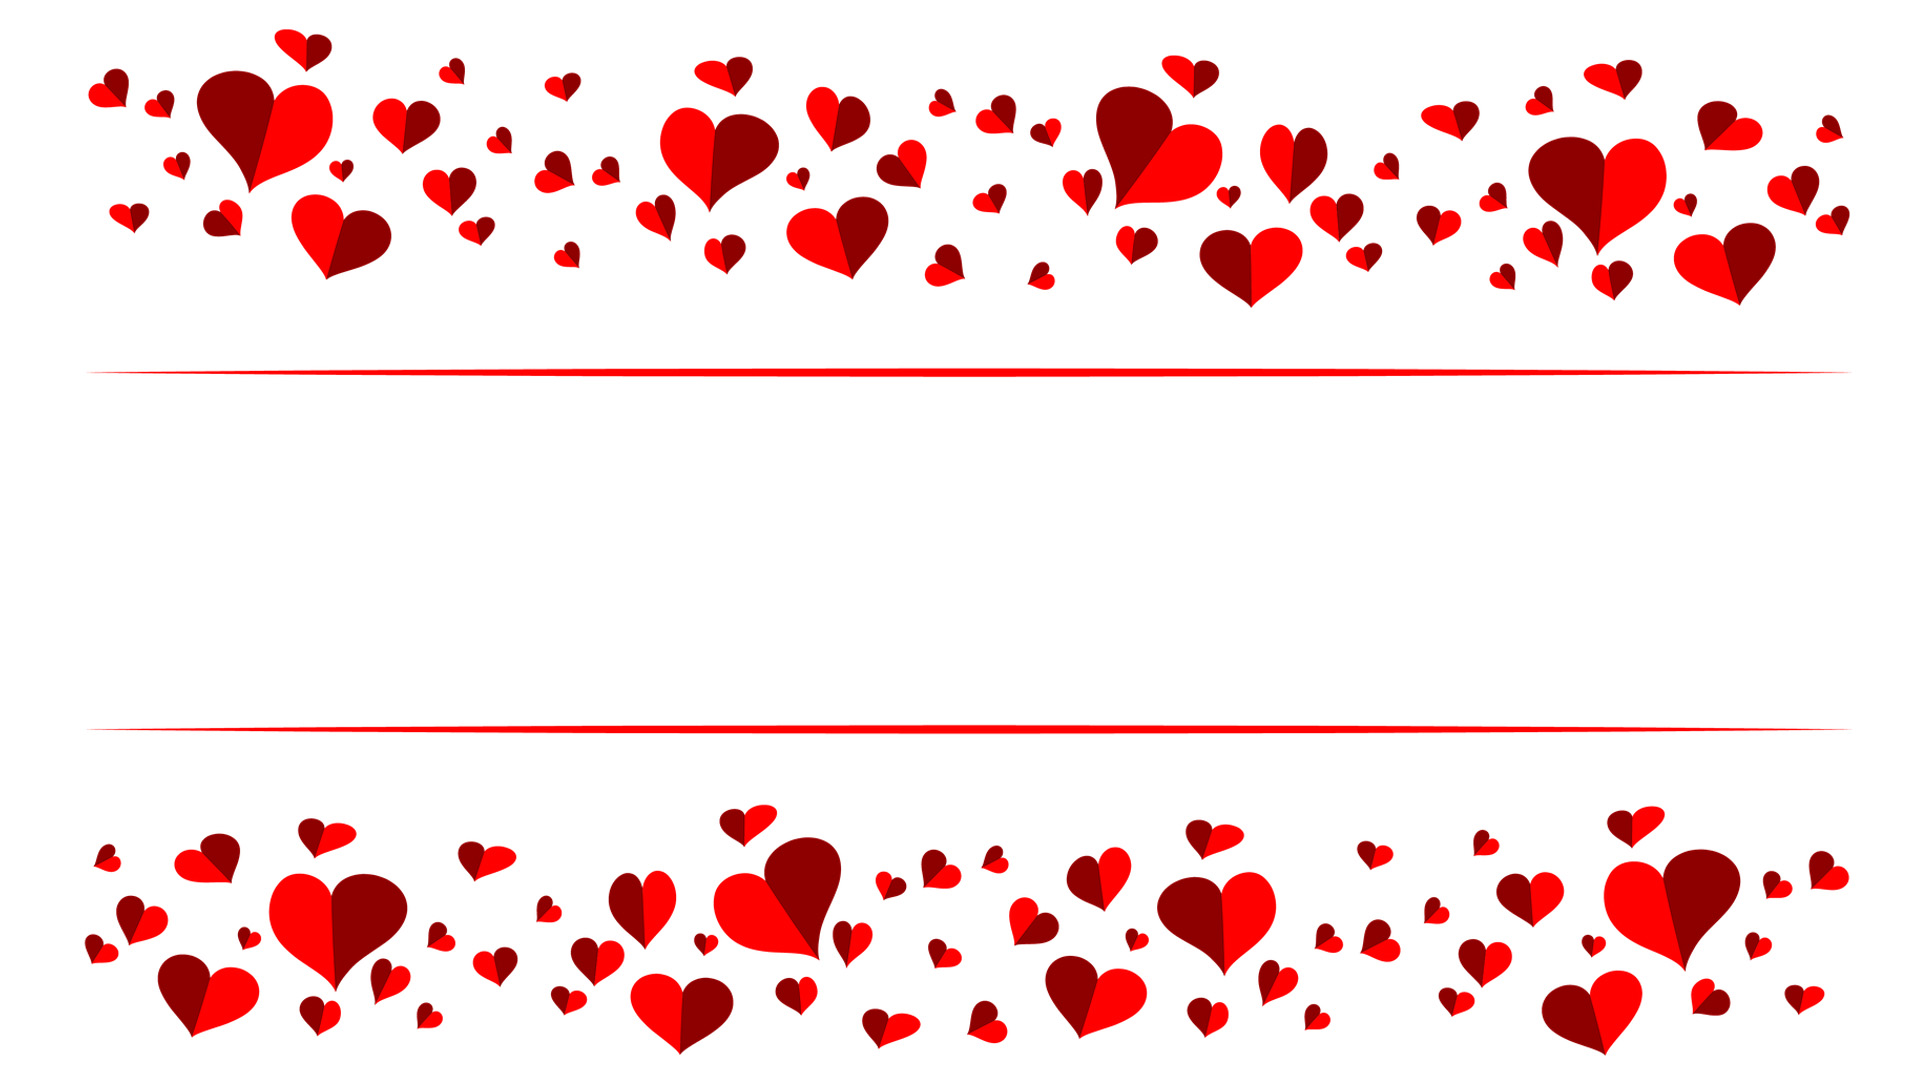 White background with two red horizontal lines breaking up the middle of the graphic. On the top and bottom of the graphic there are 2 toned small and big red hearts creating a pattern.